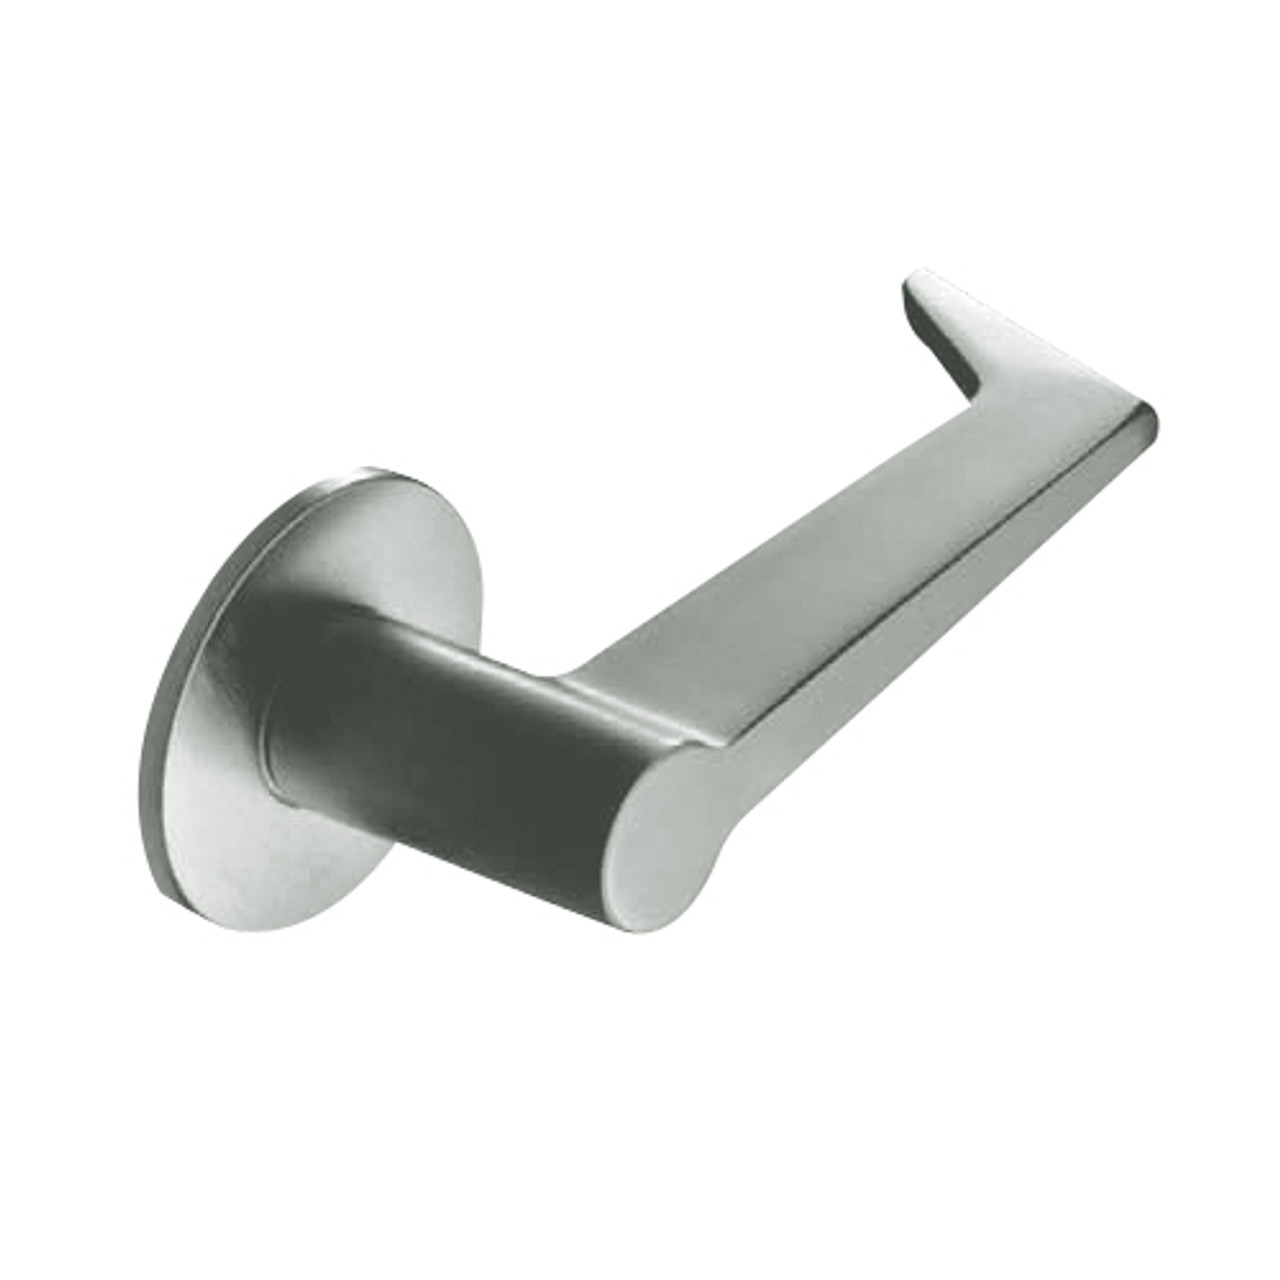 ML2024-ESF-618-M31 Corbin Russwin ML2000 Series Mortise Entrance Trim Pack with Essex Lever in Bright Nickel